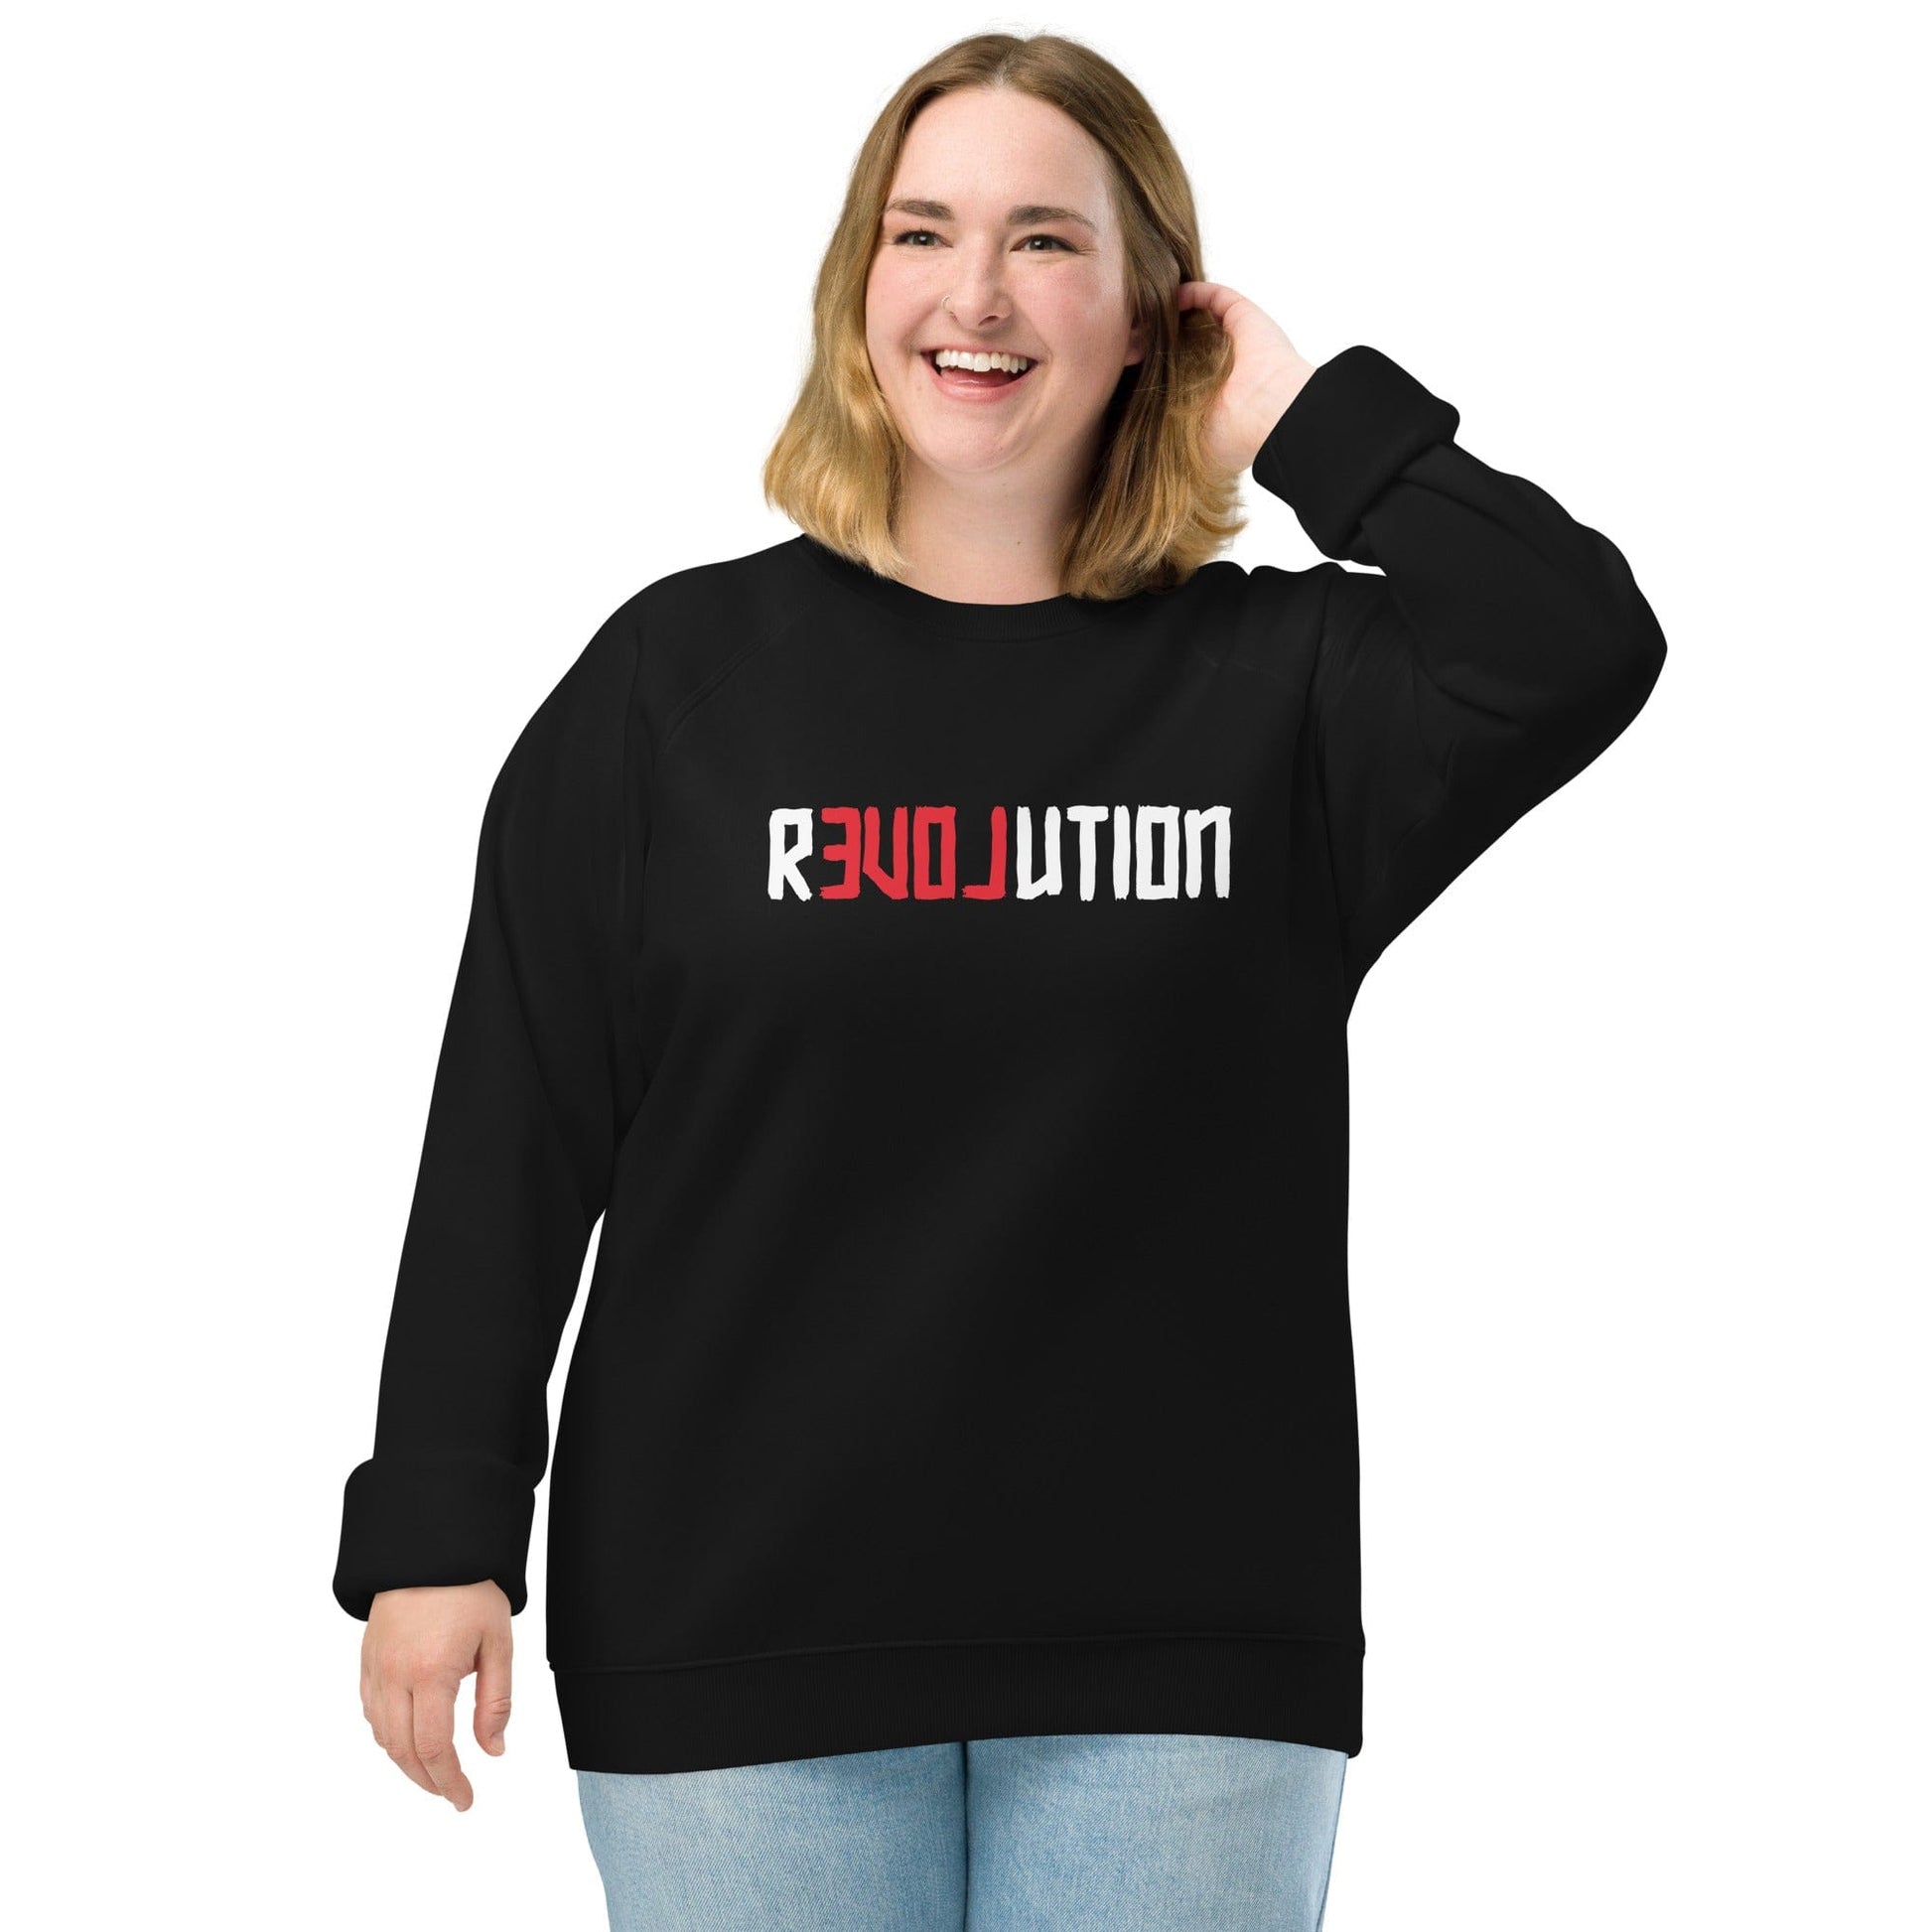 There is Love in Revolution - Eco Sweatshirt